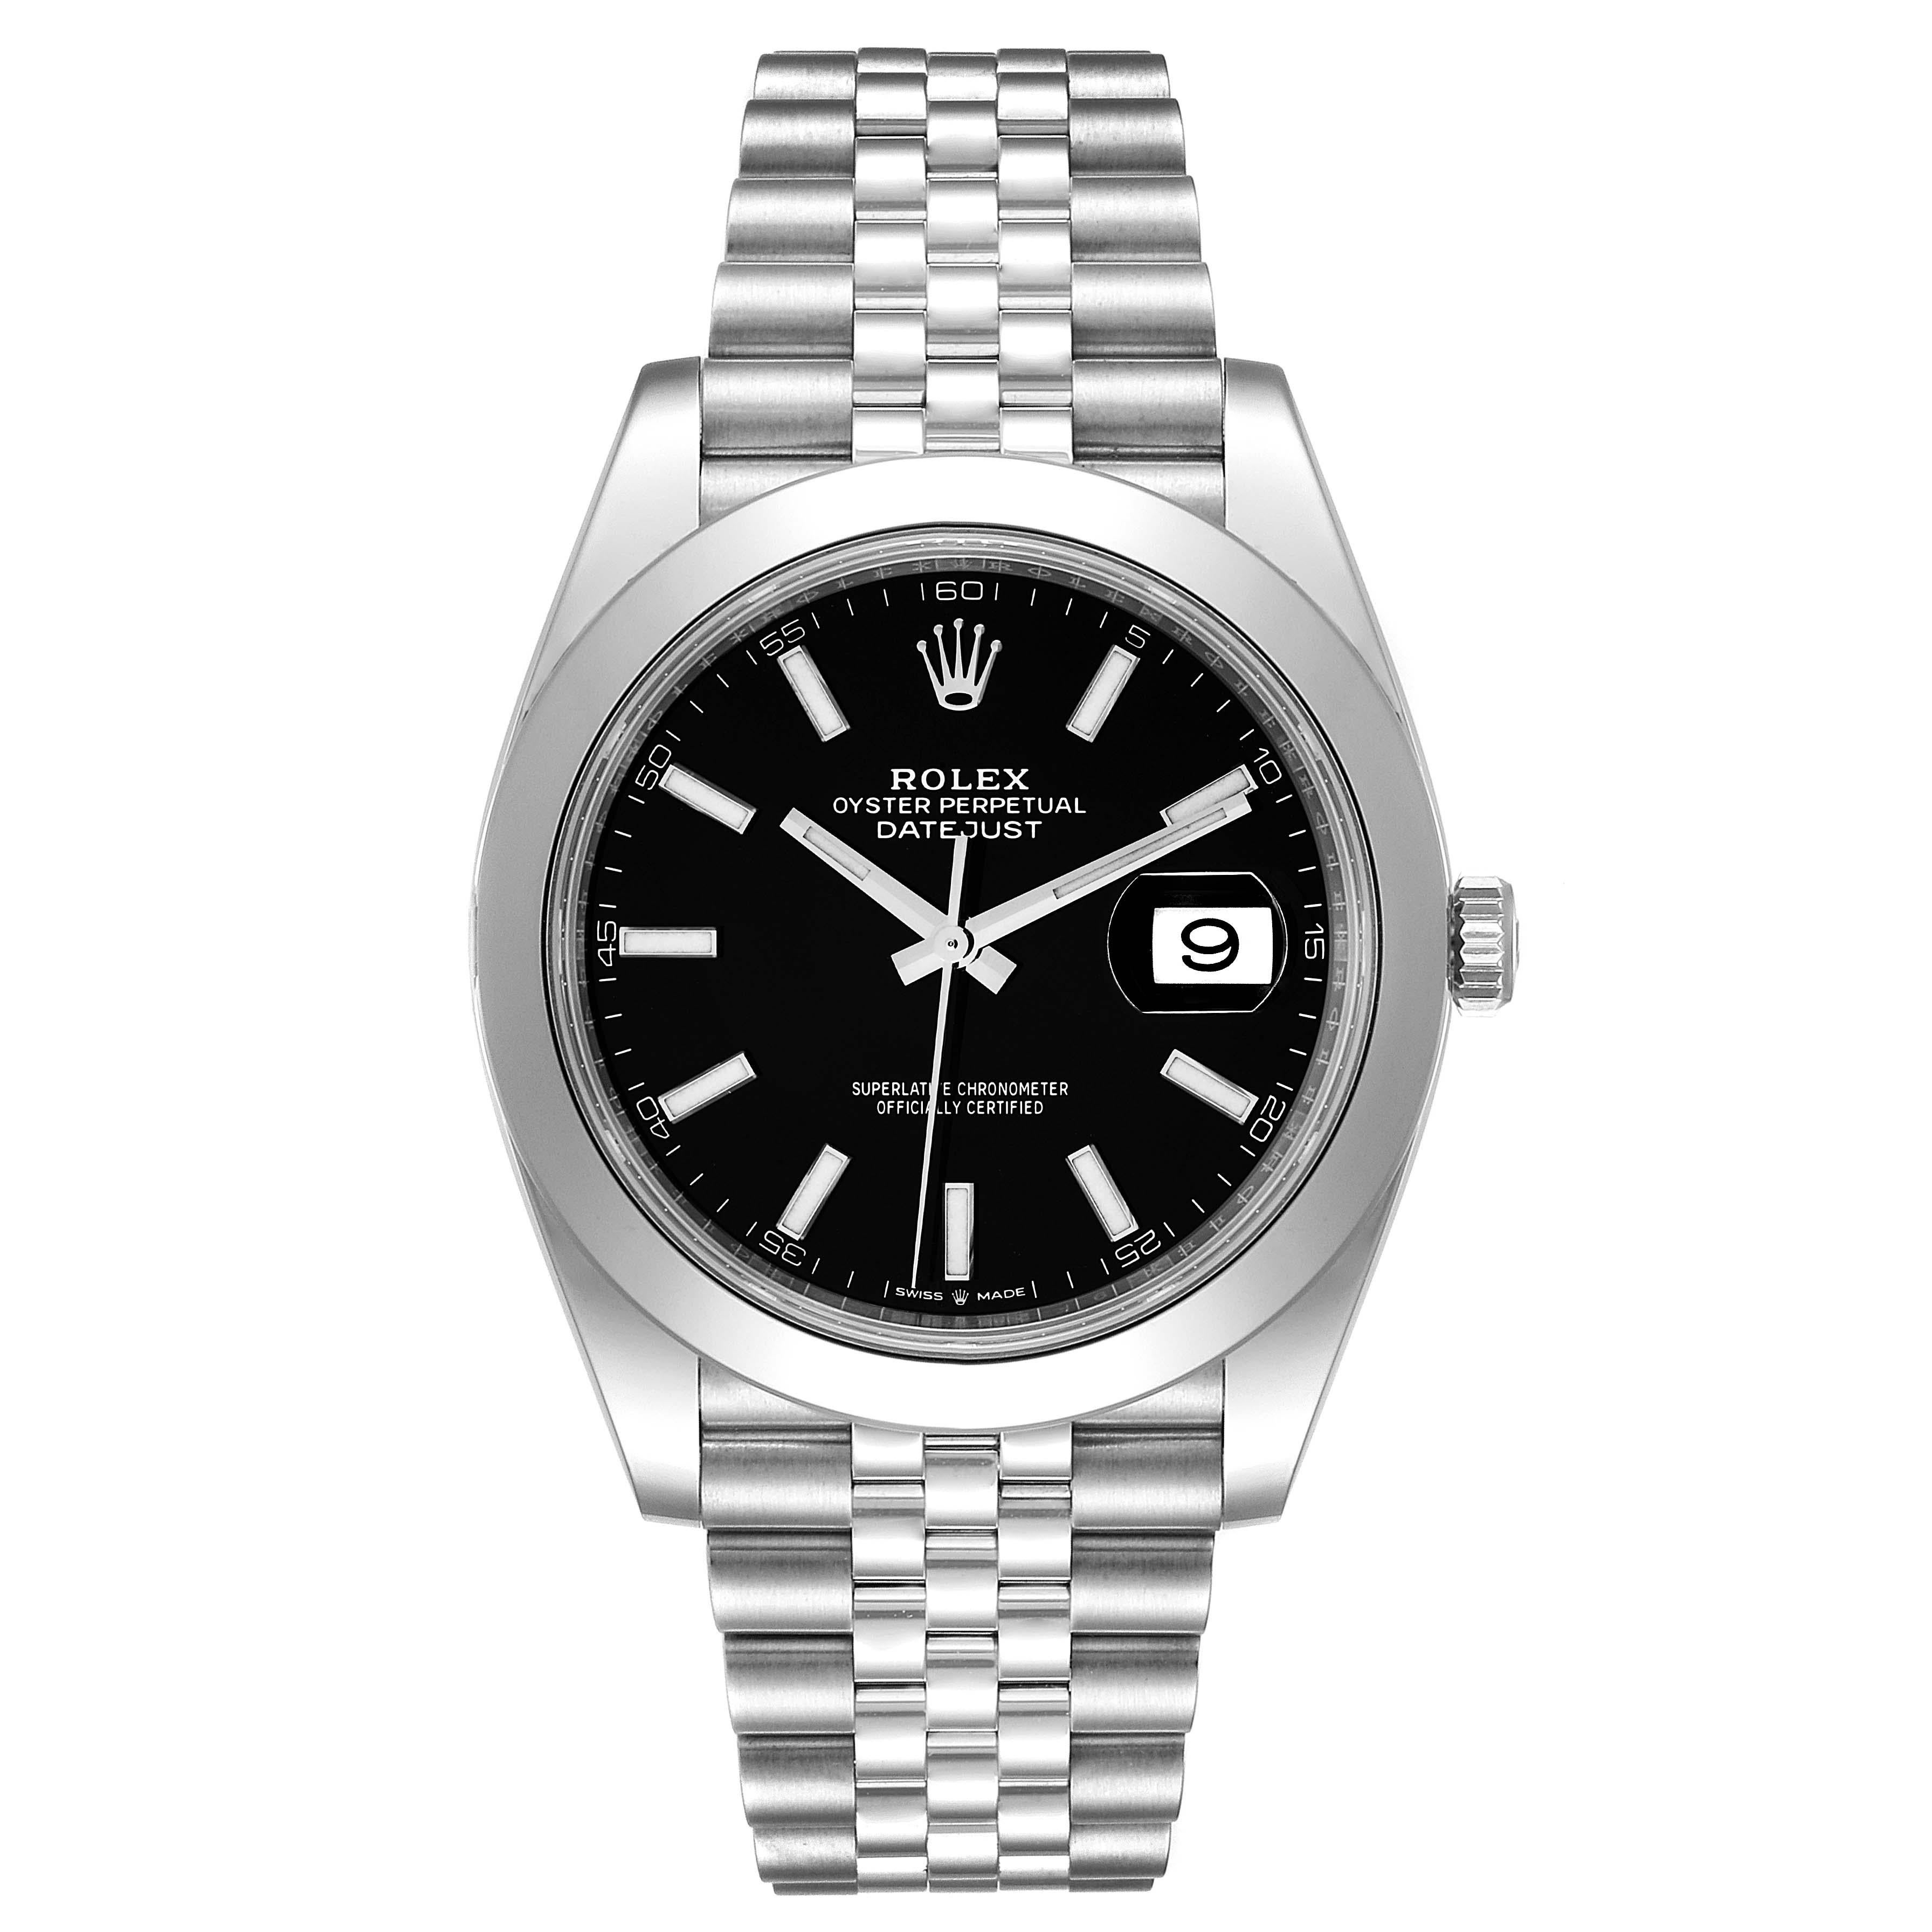 Rolex Datejust 41 Black Dial Steel Mens Watch 126300 Box Card. Officially certified chronometer automatic self-winding movement. Stainless steel case 41 mm in diameter. Rolex logo on a crown. White gold fluted bezel. Scratch resistant sapphire